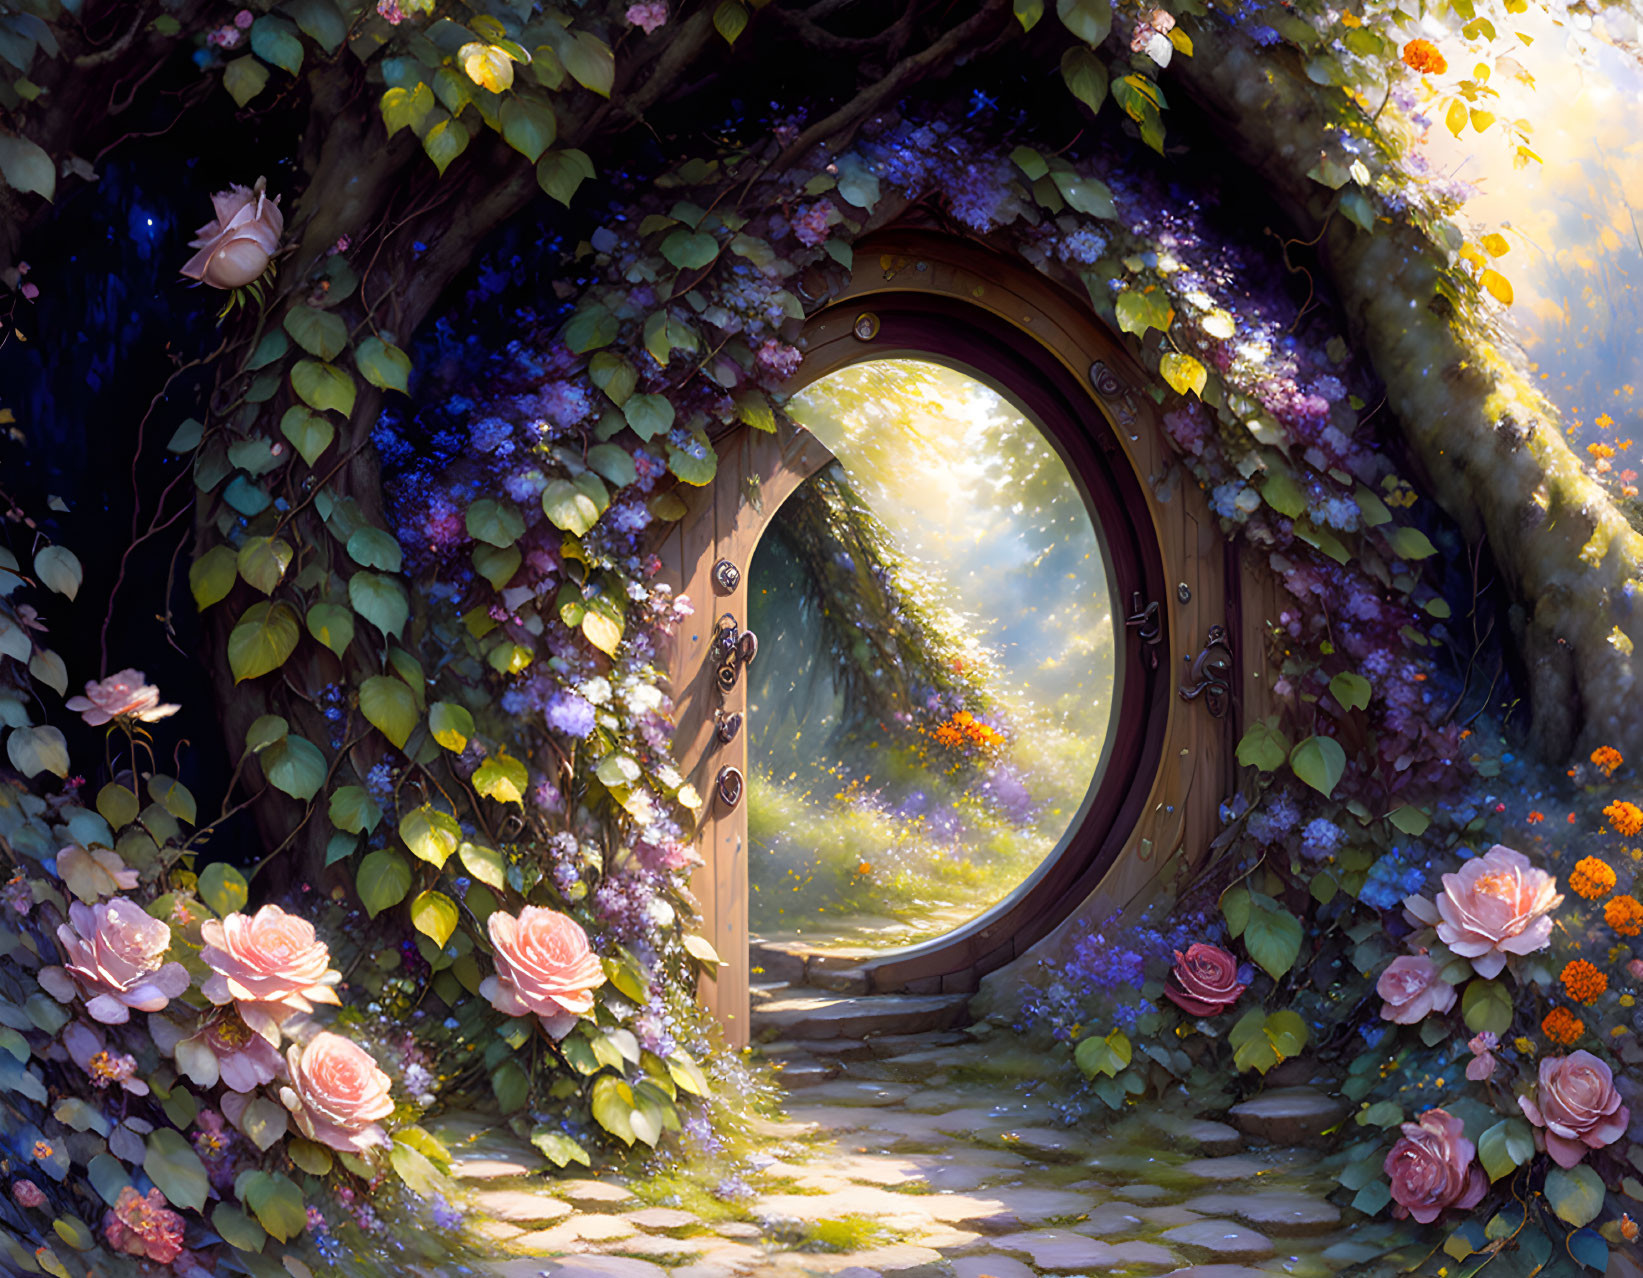 Circular wooden door in flower-covered tree leading to sunlit forest